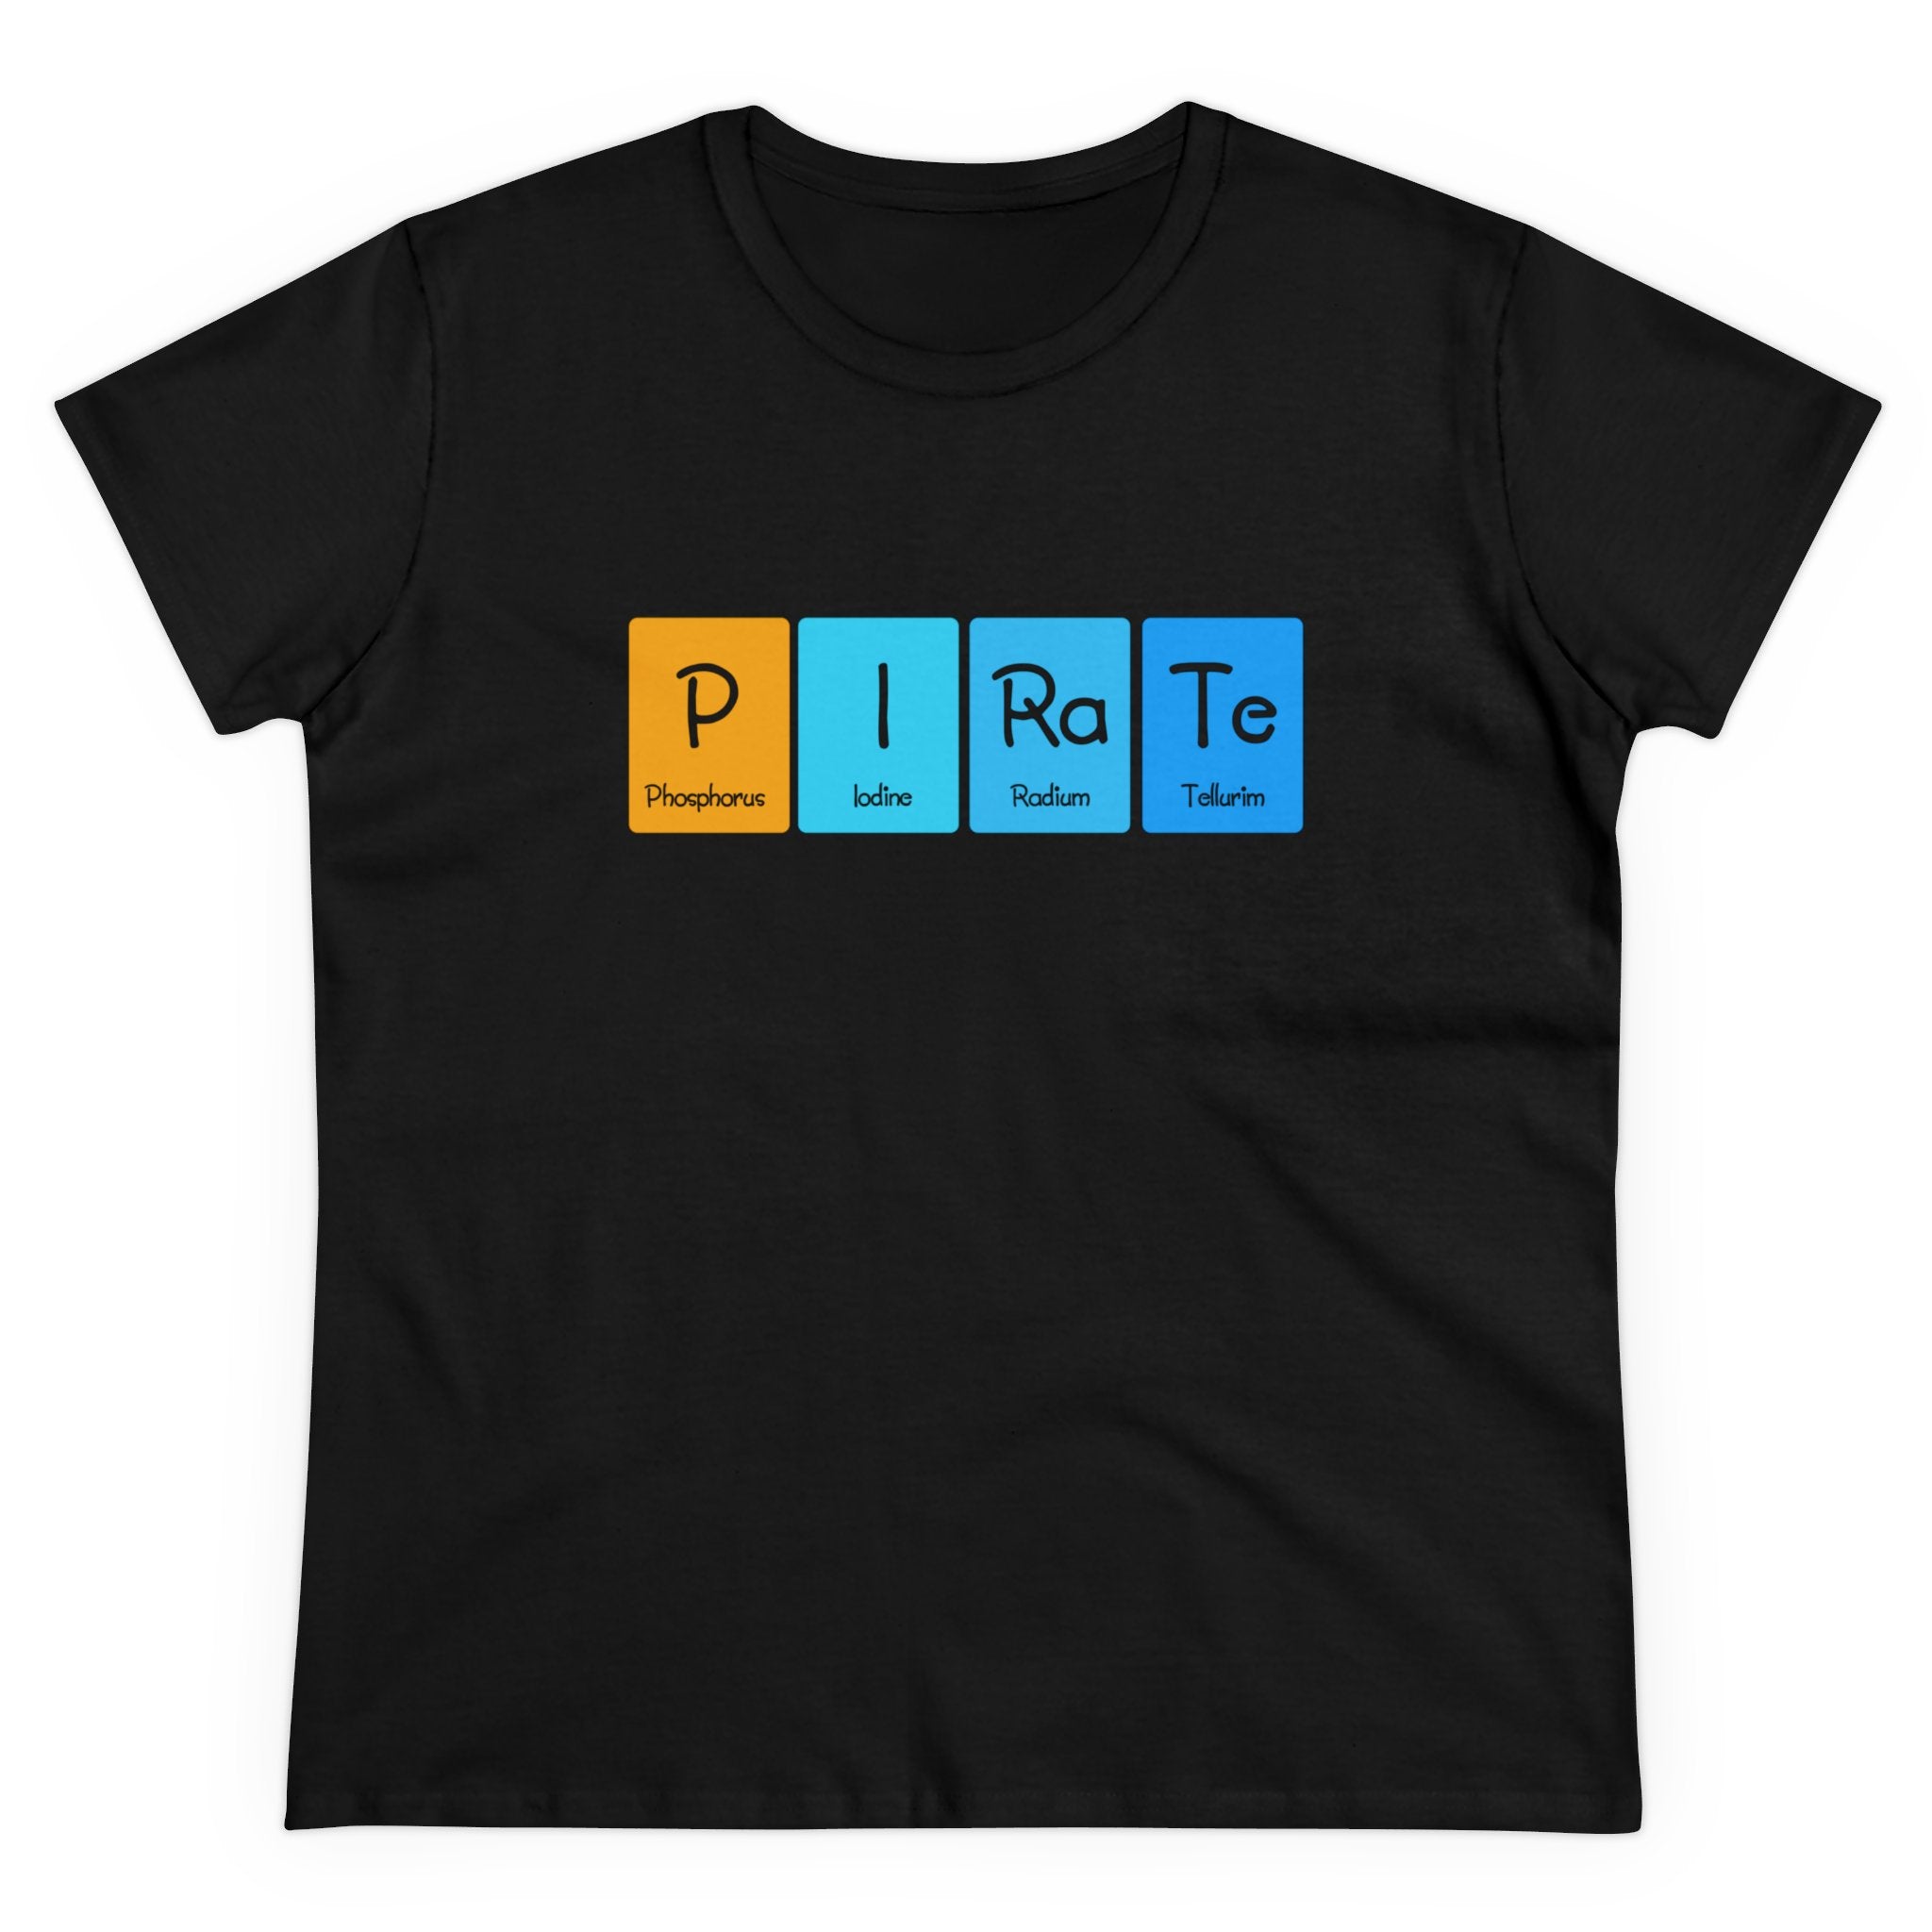 P-I-Ra-Te - Women's Tee featuring the word "PIRATE" spelled with elements from the periodic table: Phosphorus (P), Iodine (I), Radium (Ra), and Tellurium (Te). Made from ethically grown cotton, this trendy t-shirt combines style and sustainability.